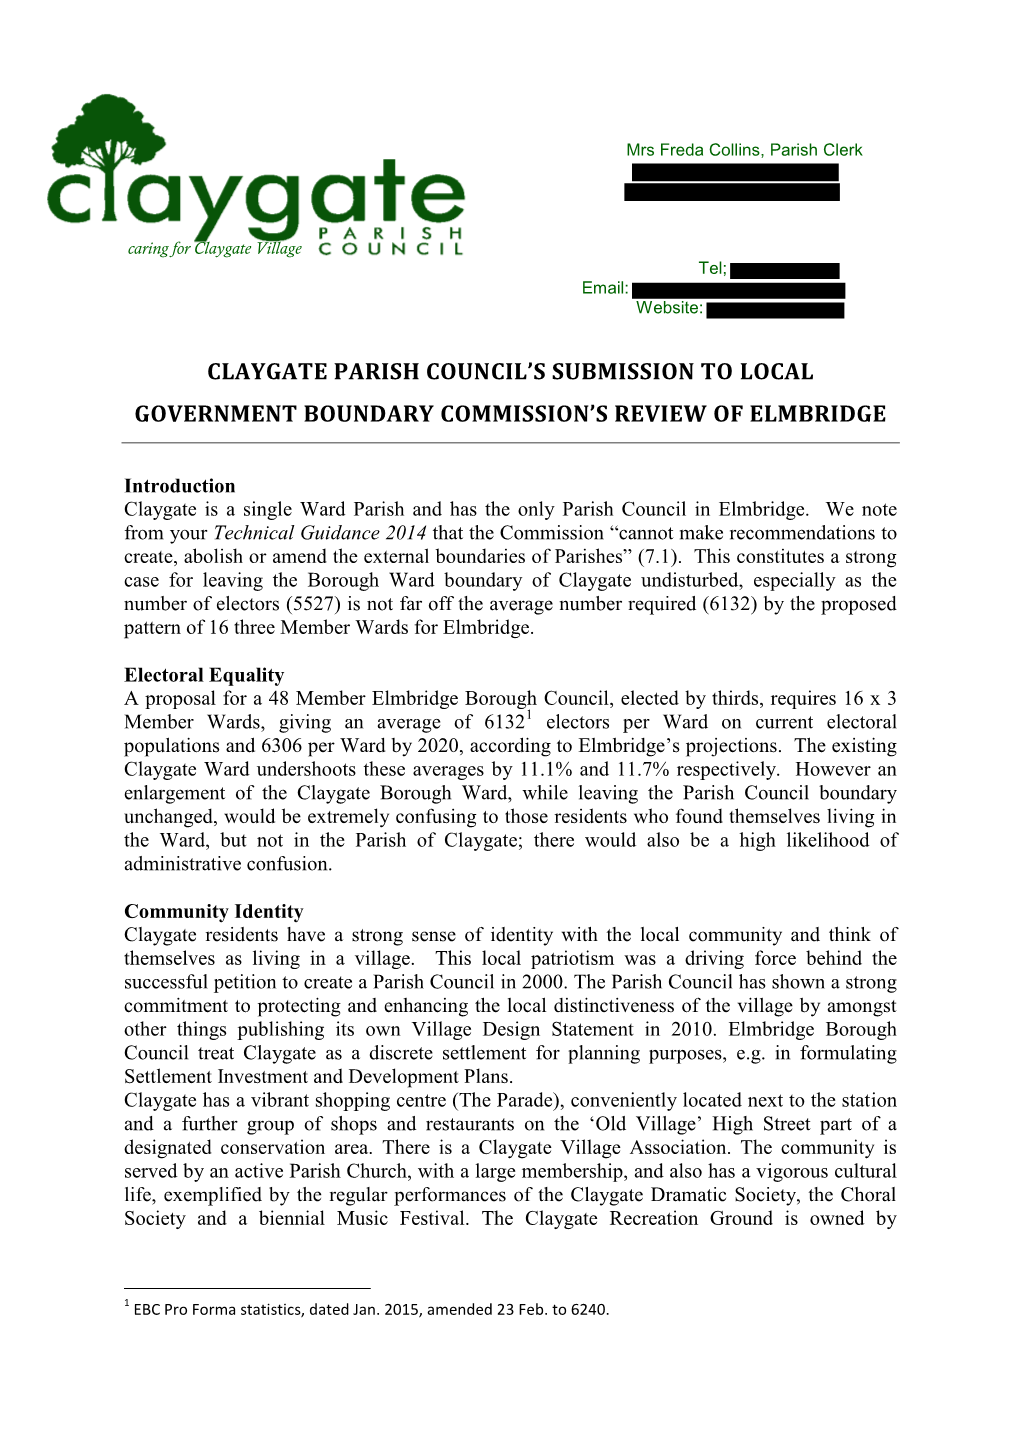 Claygate Parish Council’S Submission to Local Government Boundary Commission’S Review of Elmbridge